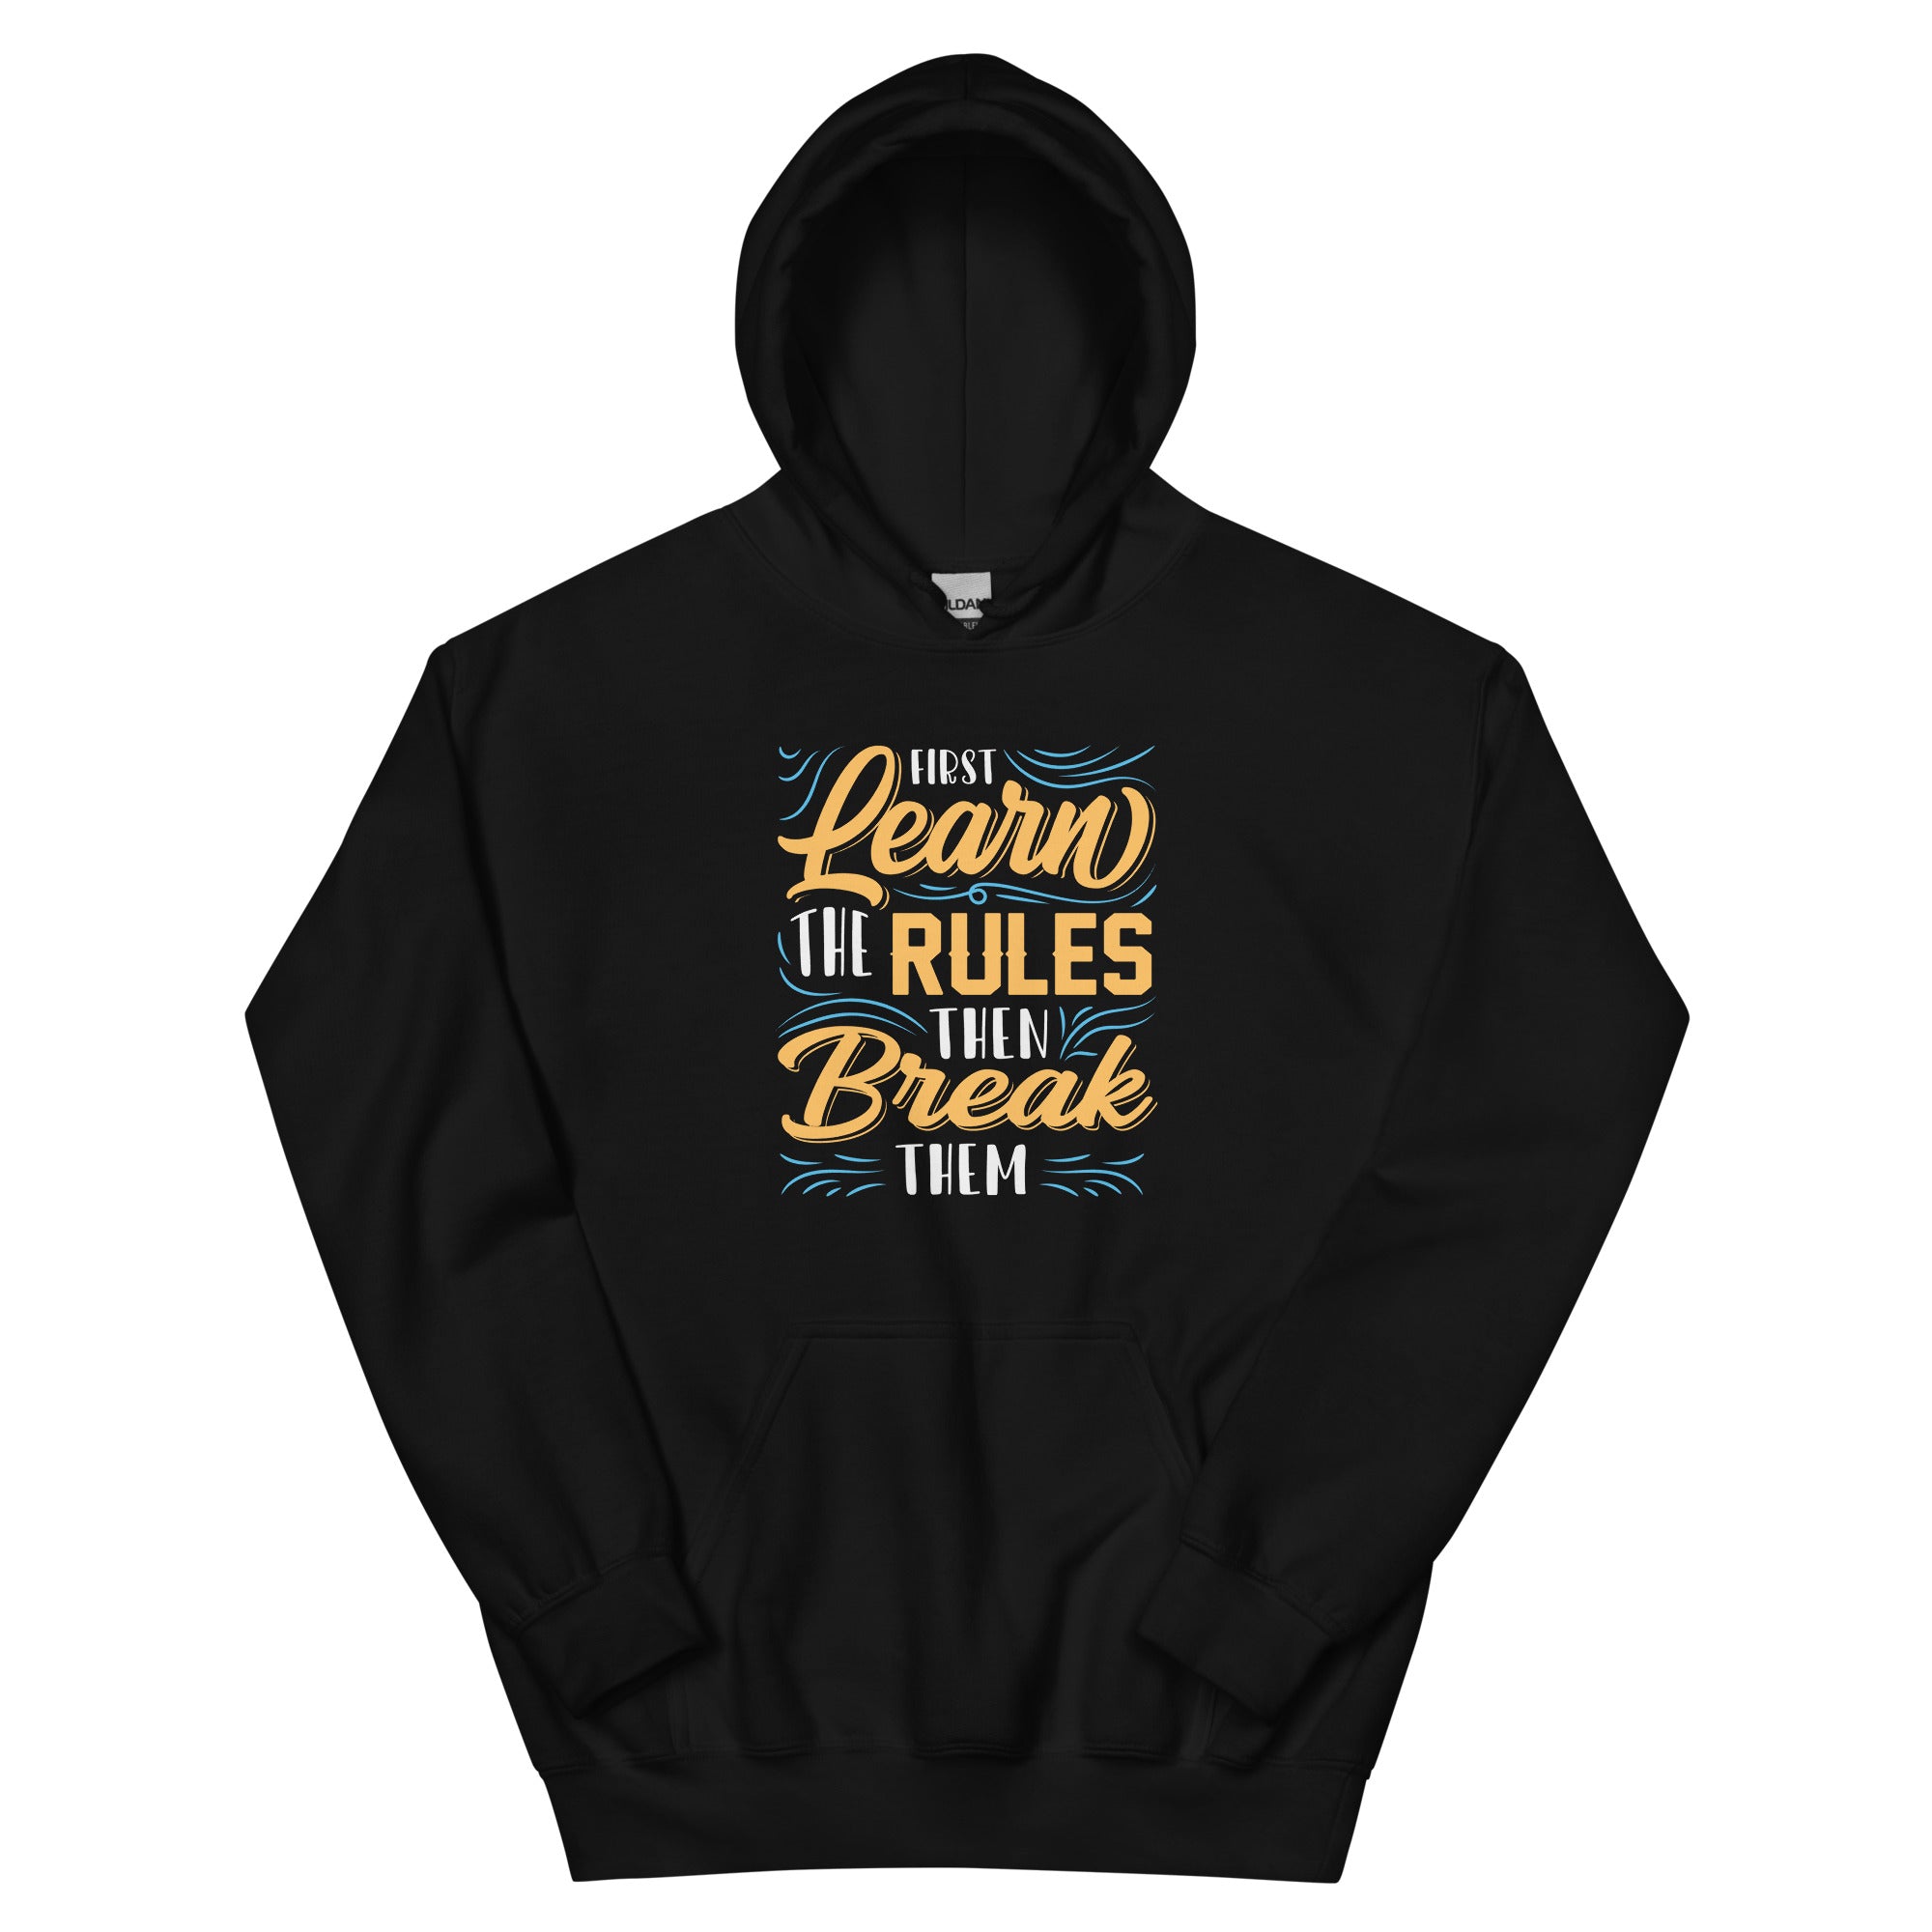 First Learn the Rules & Then Break Them - Unisex Hoodie